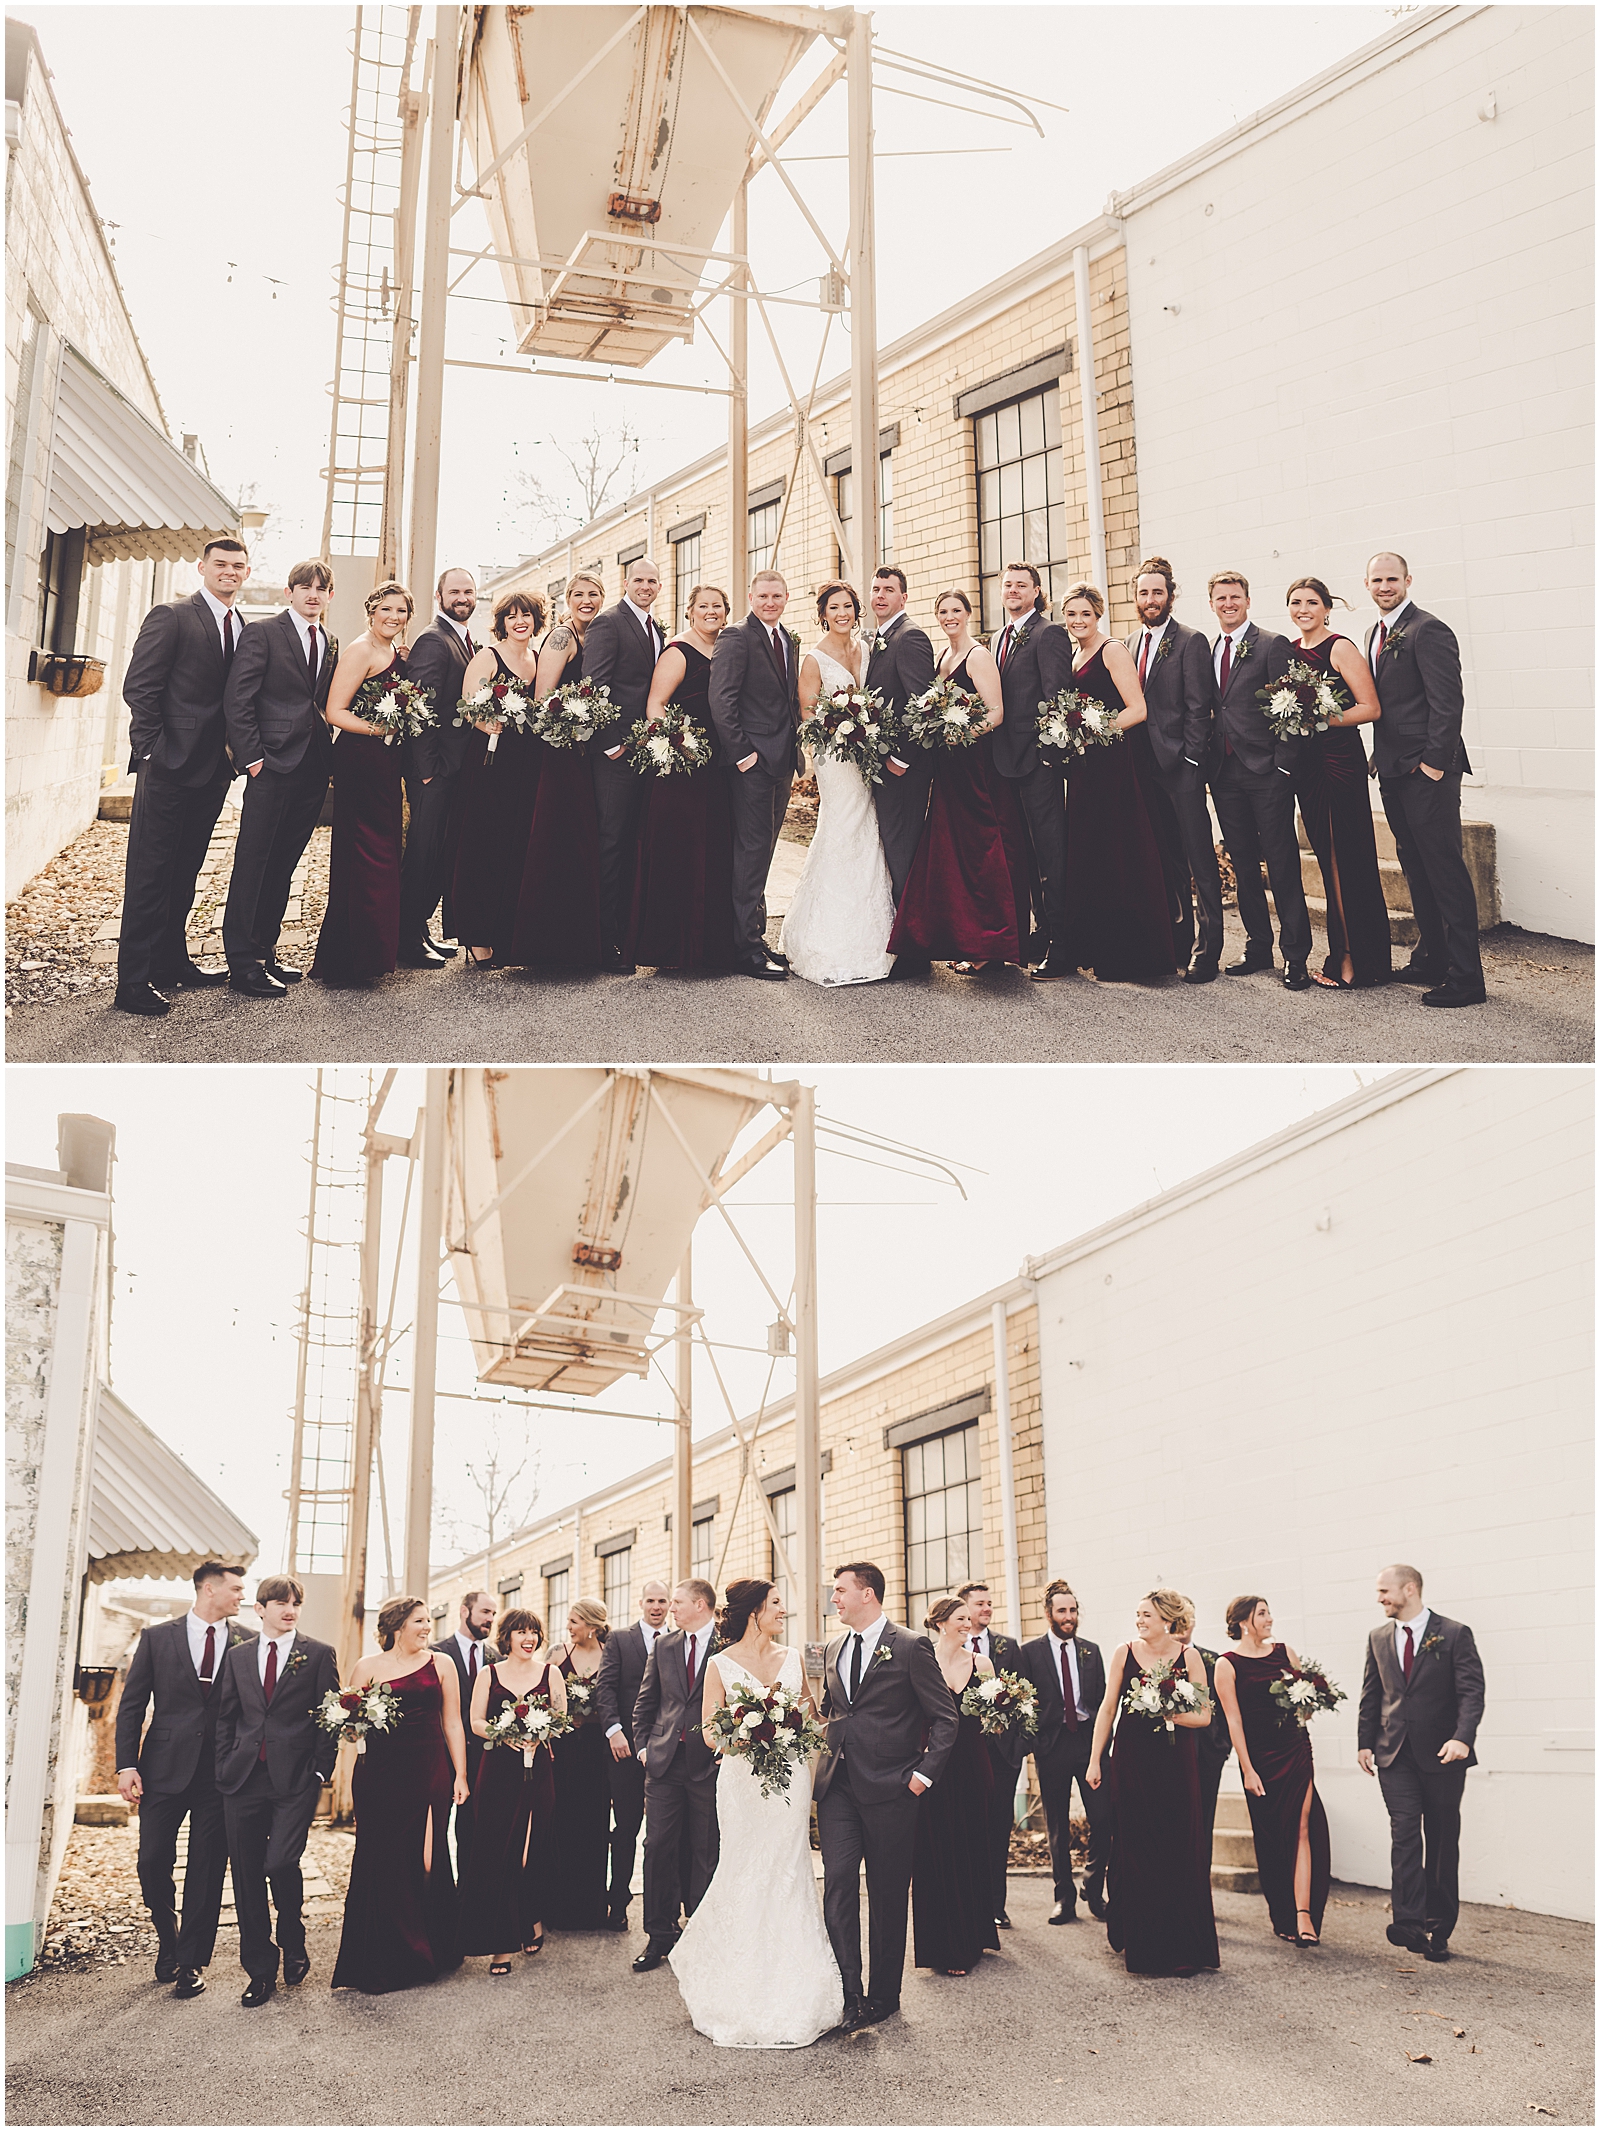 Allye & Grant's winter wedding at the Olde Wicks Factory in Highland, Illinois with Chicagoland wedding photographer Kara Evans Photographer.